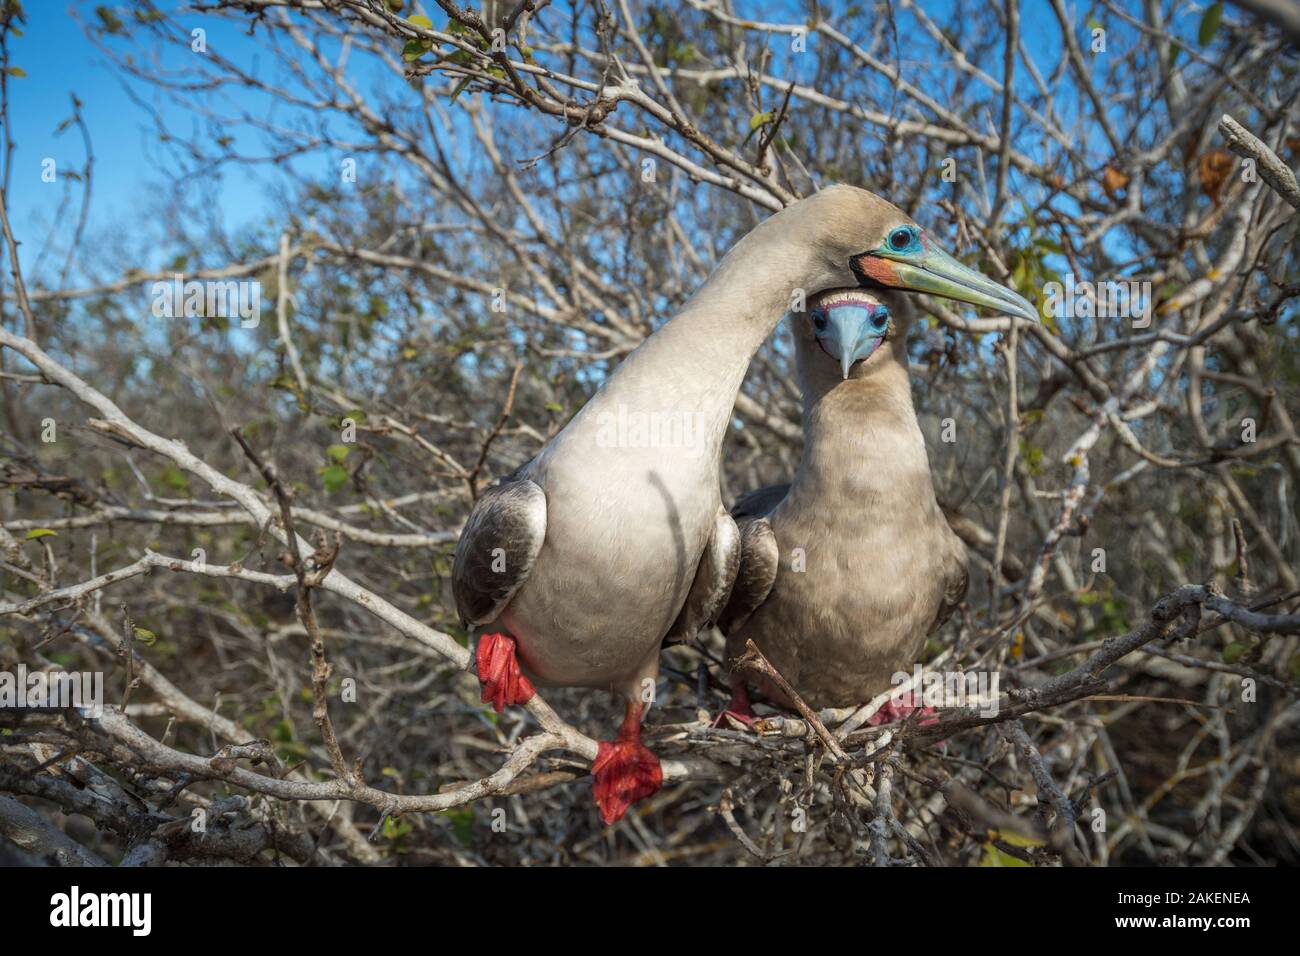 Red-footed booby (Sula sula), pair perched in tree. Genovesa Island, Galapagos. Stock Photo